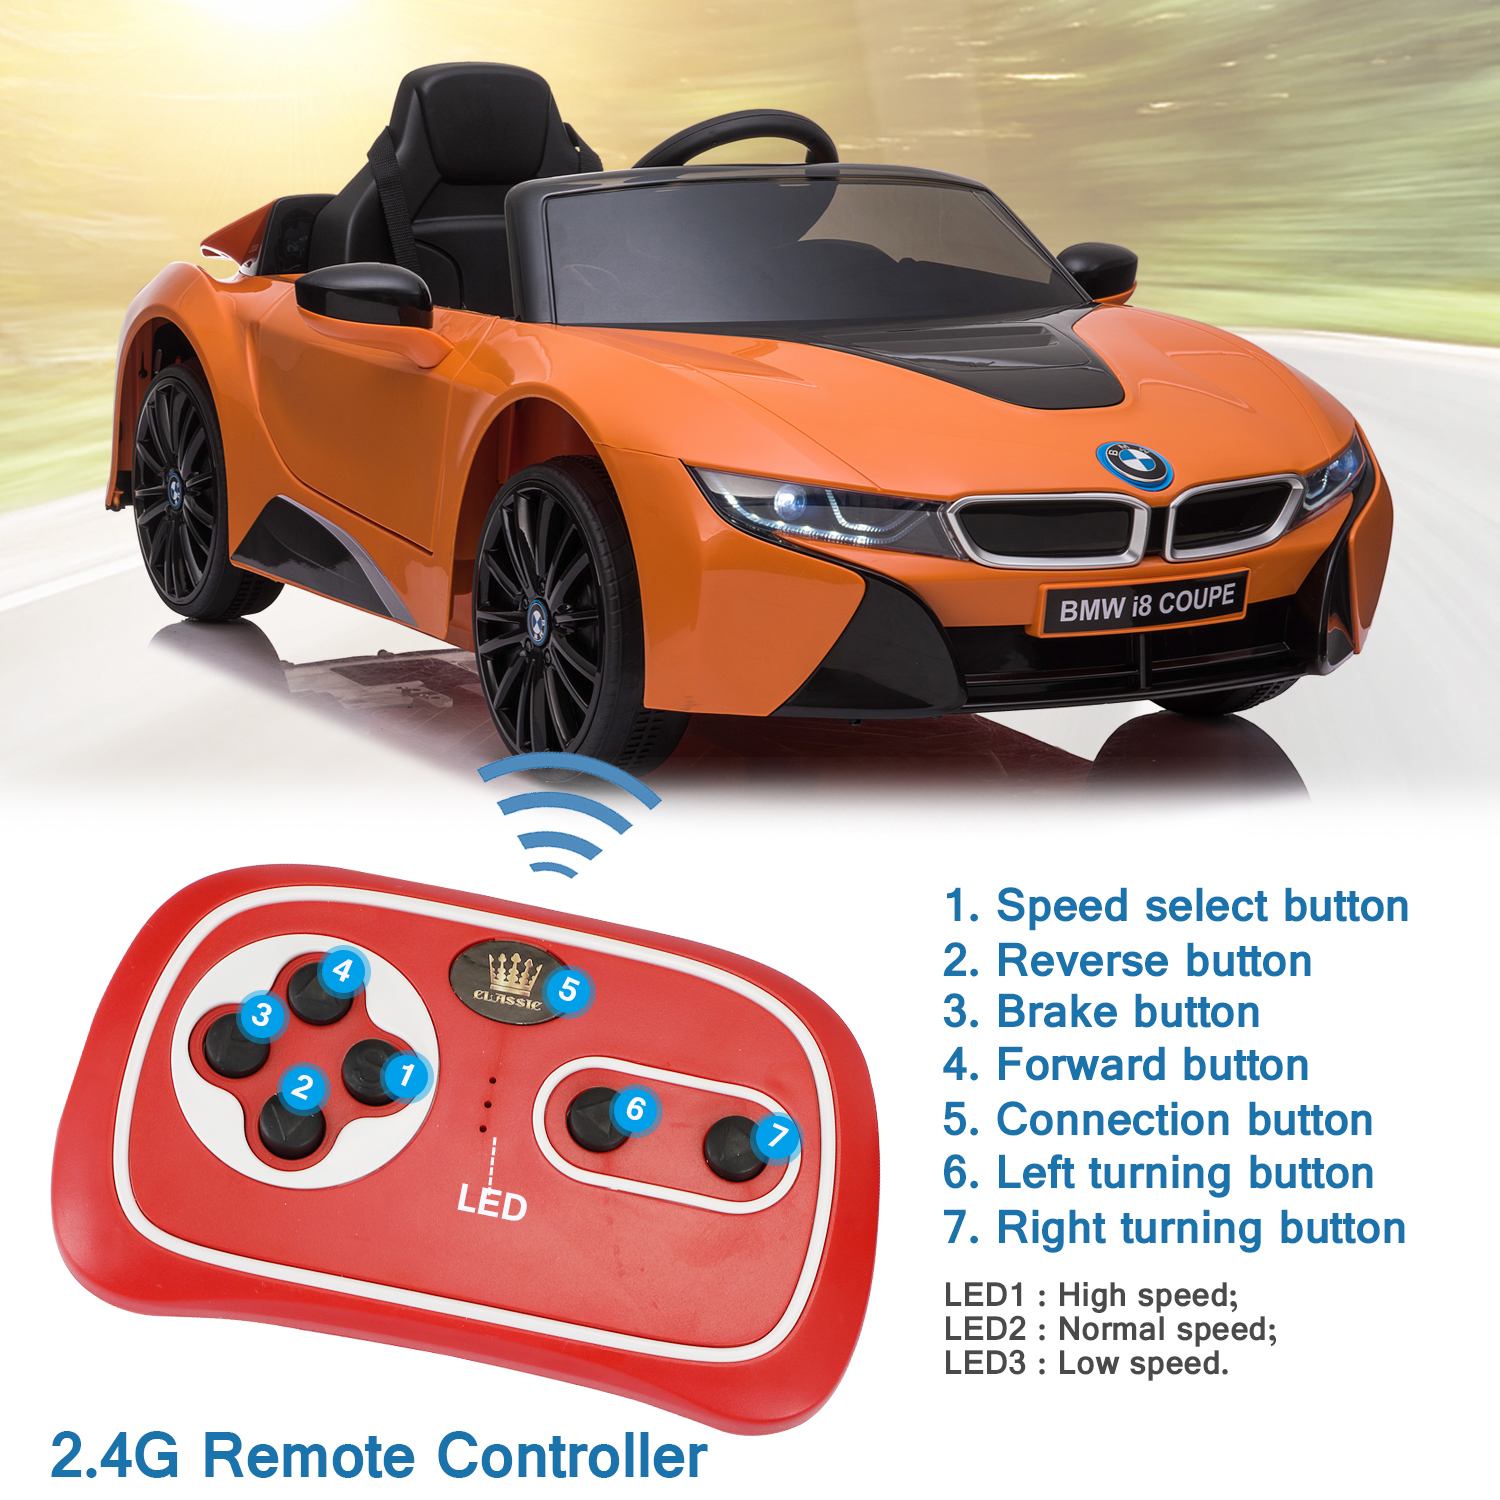 Tobbi 12V Kid Ride on Car with Remote Control Electric Battery Powered Vehicle Licensed BMW I8, with MP3, Music, Horn, LED Lights